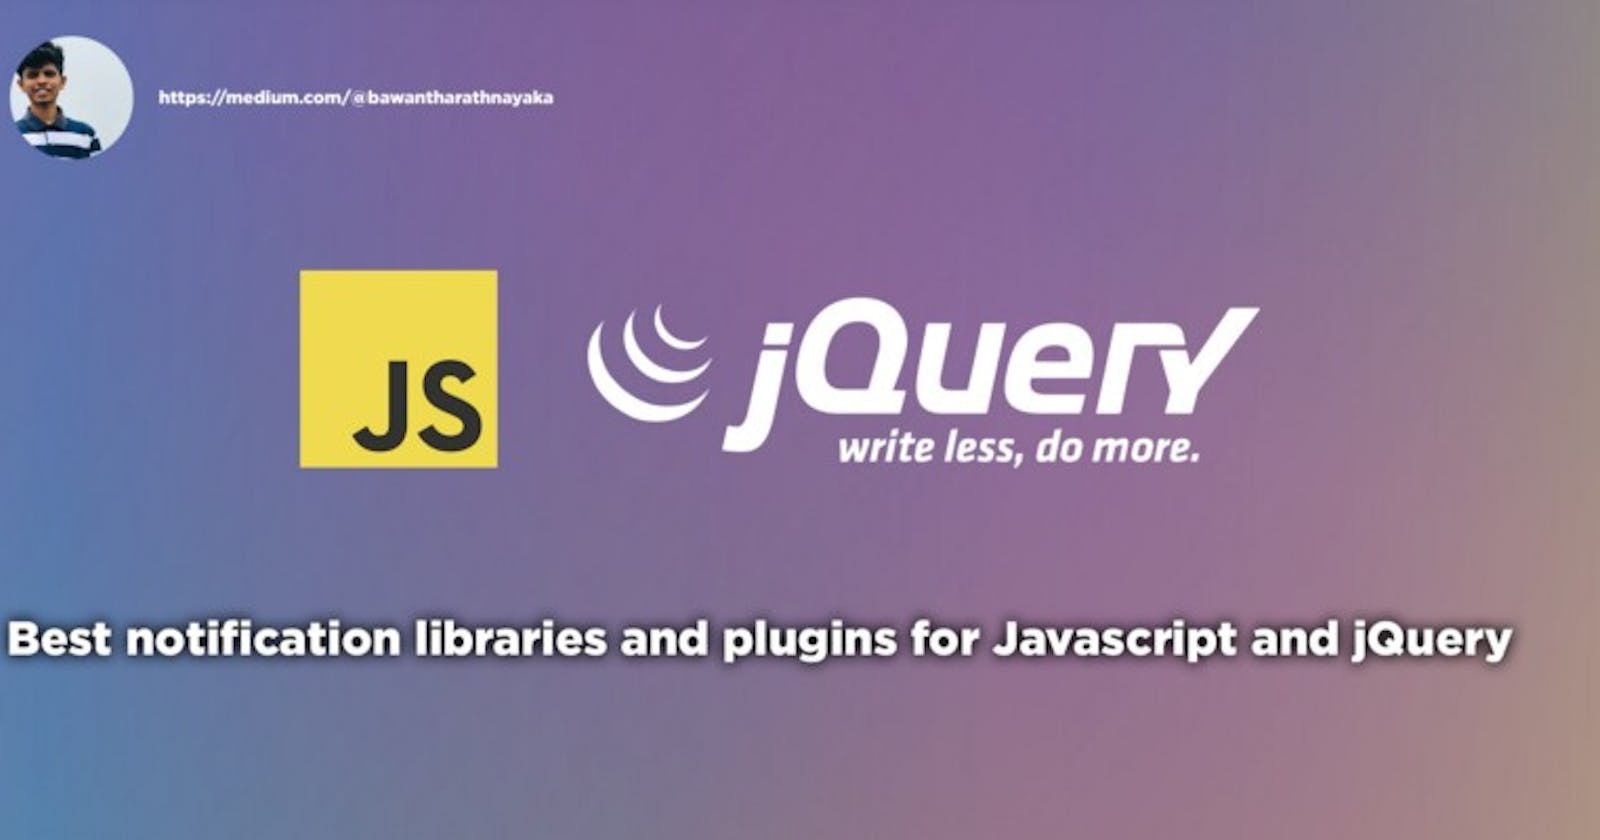 Best notification libraries and plugins for Javascript and jQuery